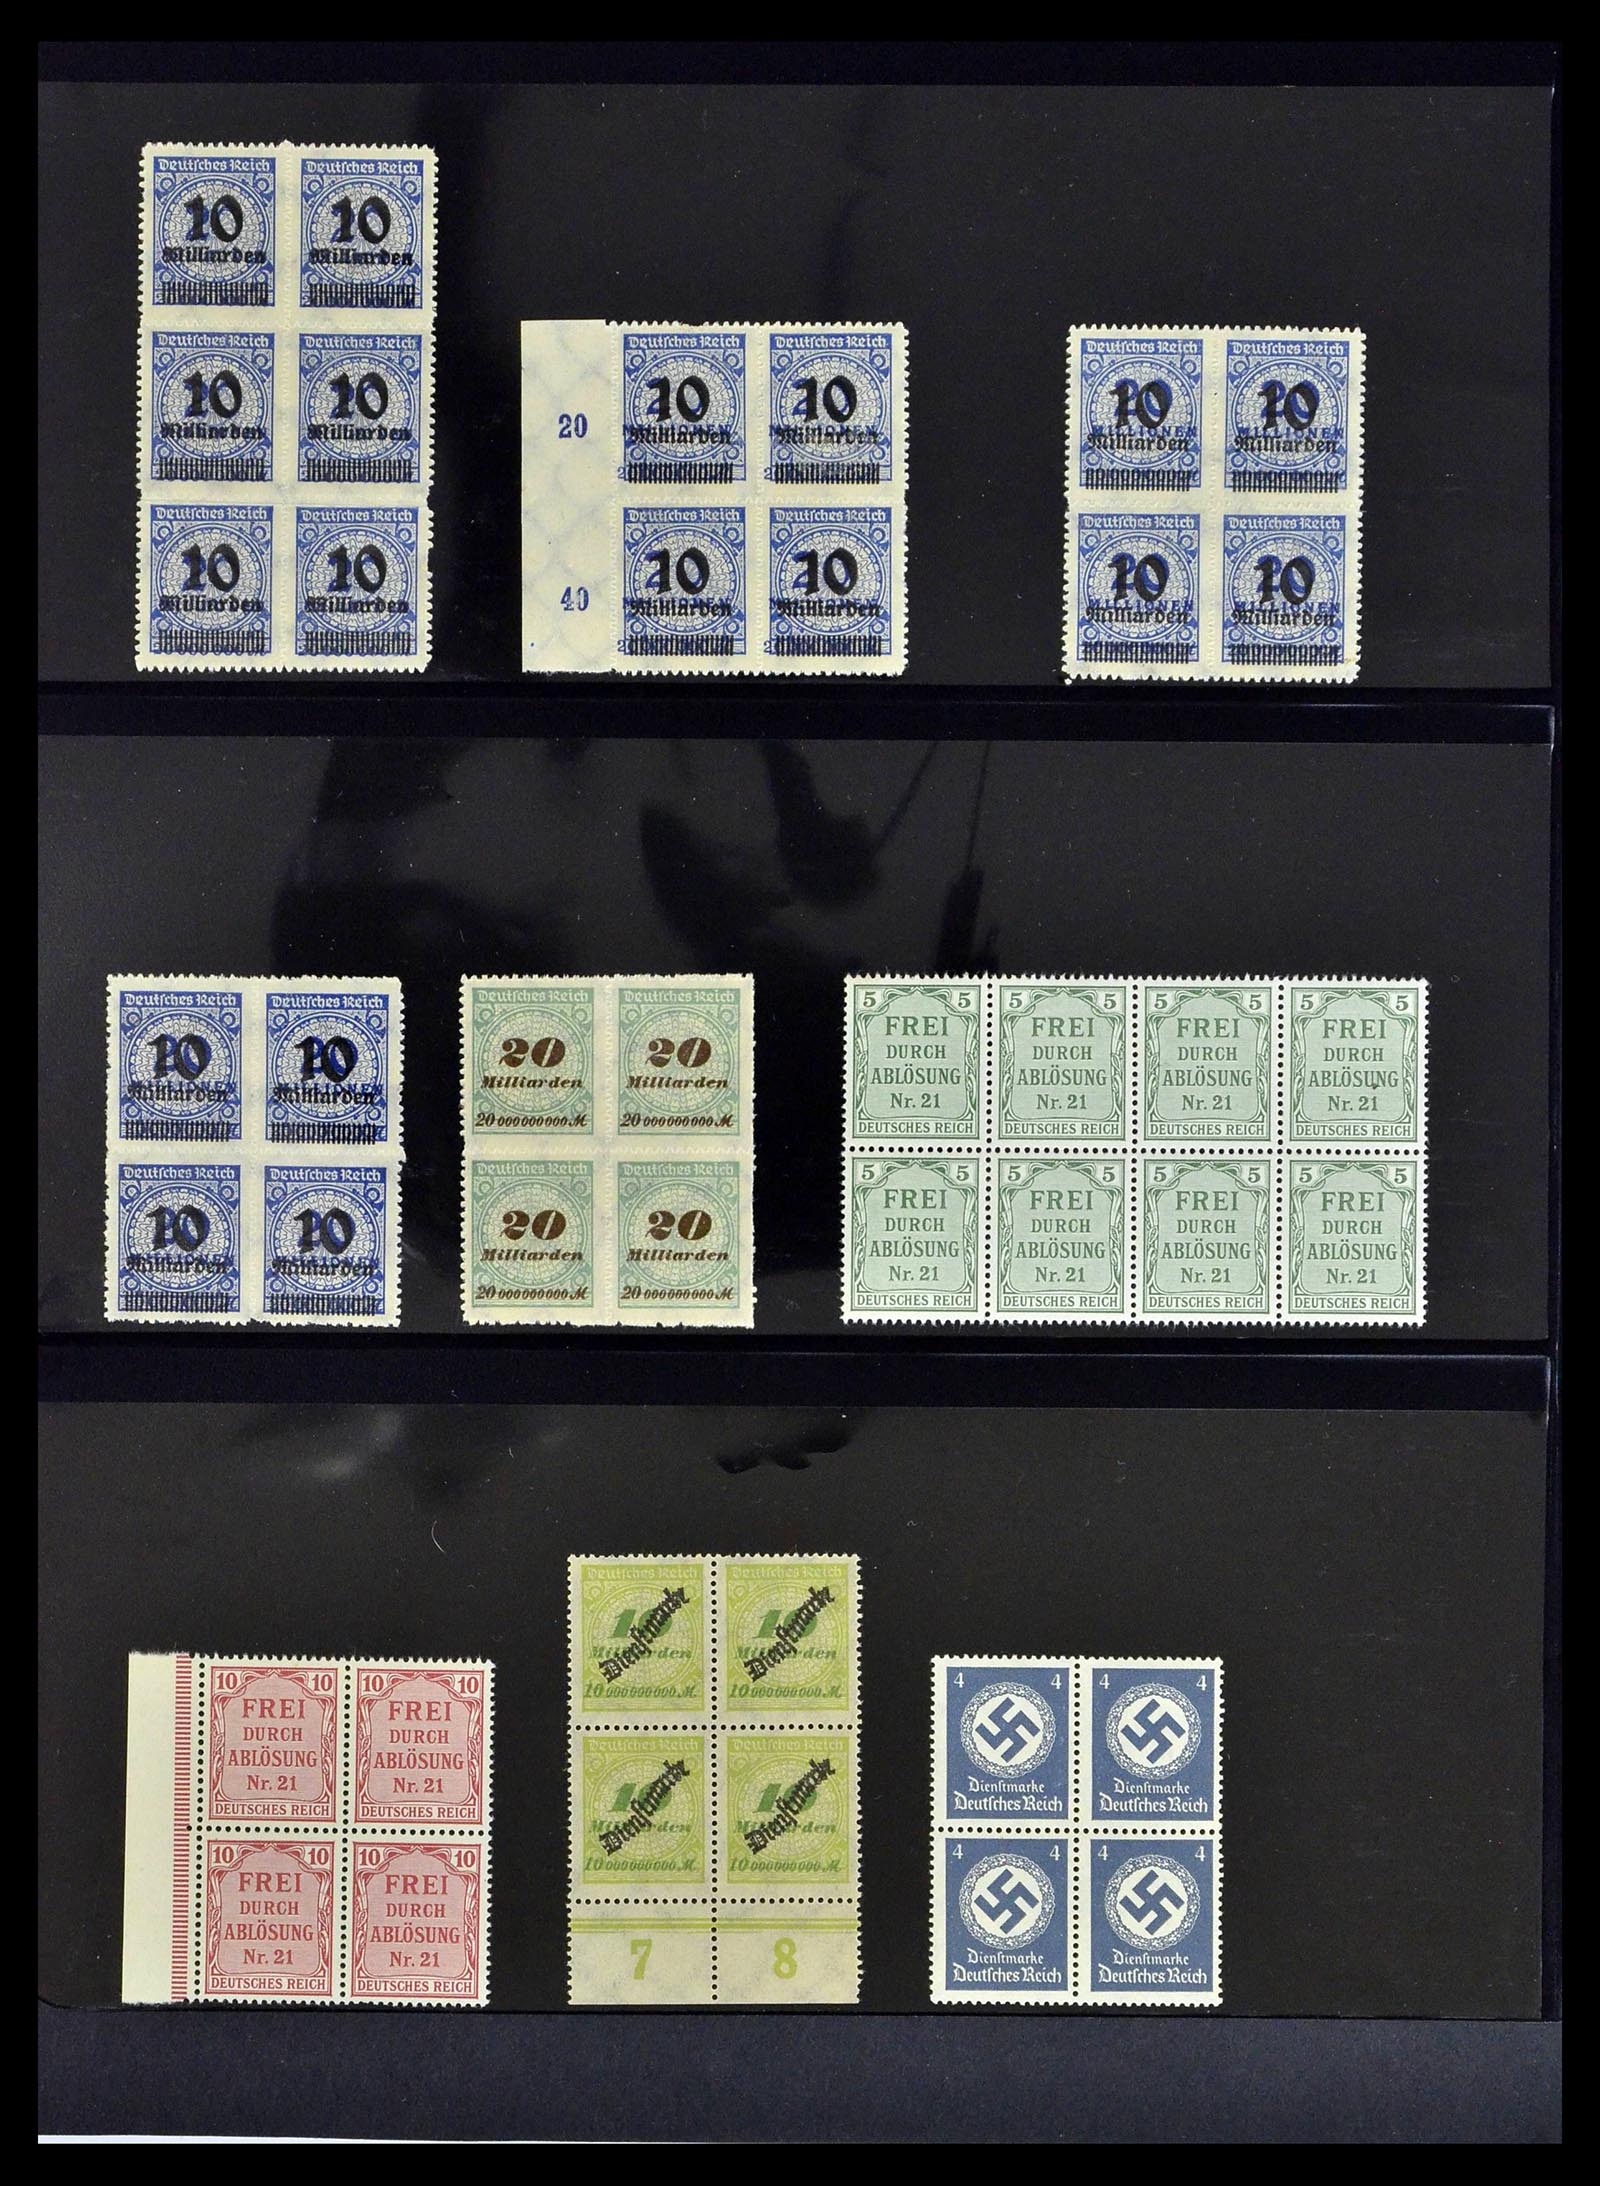 39255 0038 - Stamp collection 39255 German Reich MNH blocks of 4.